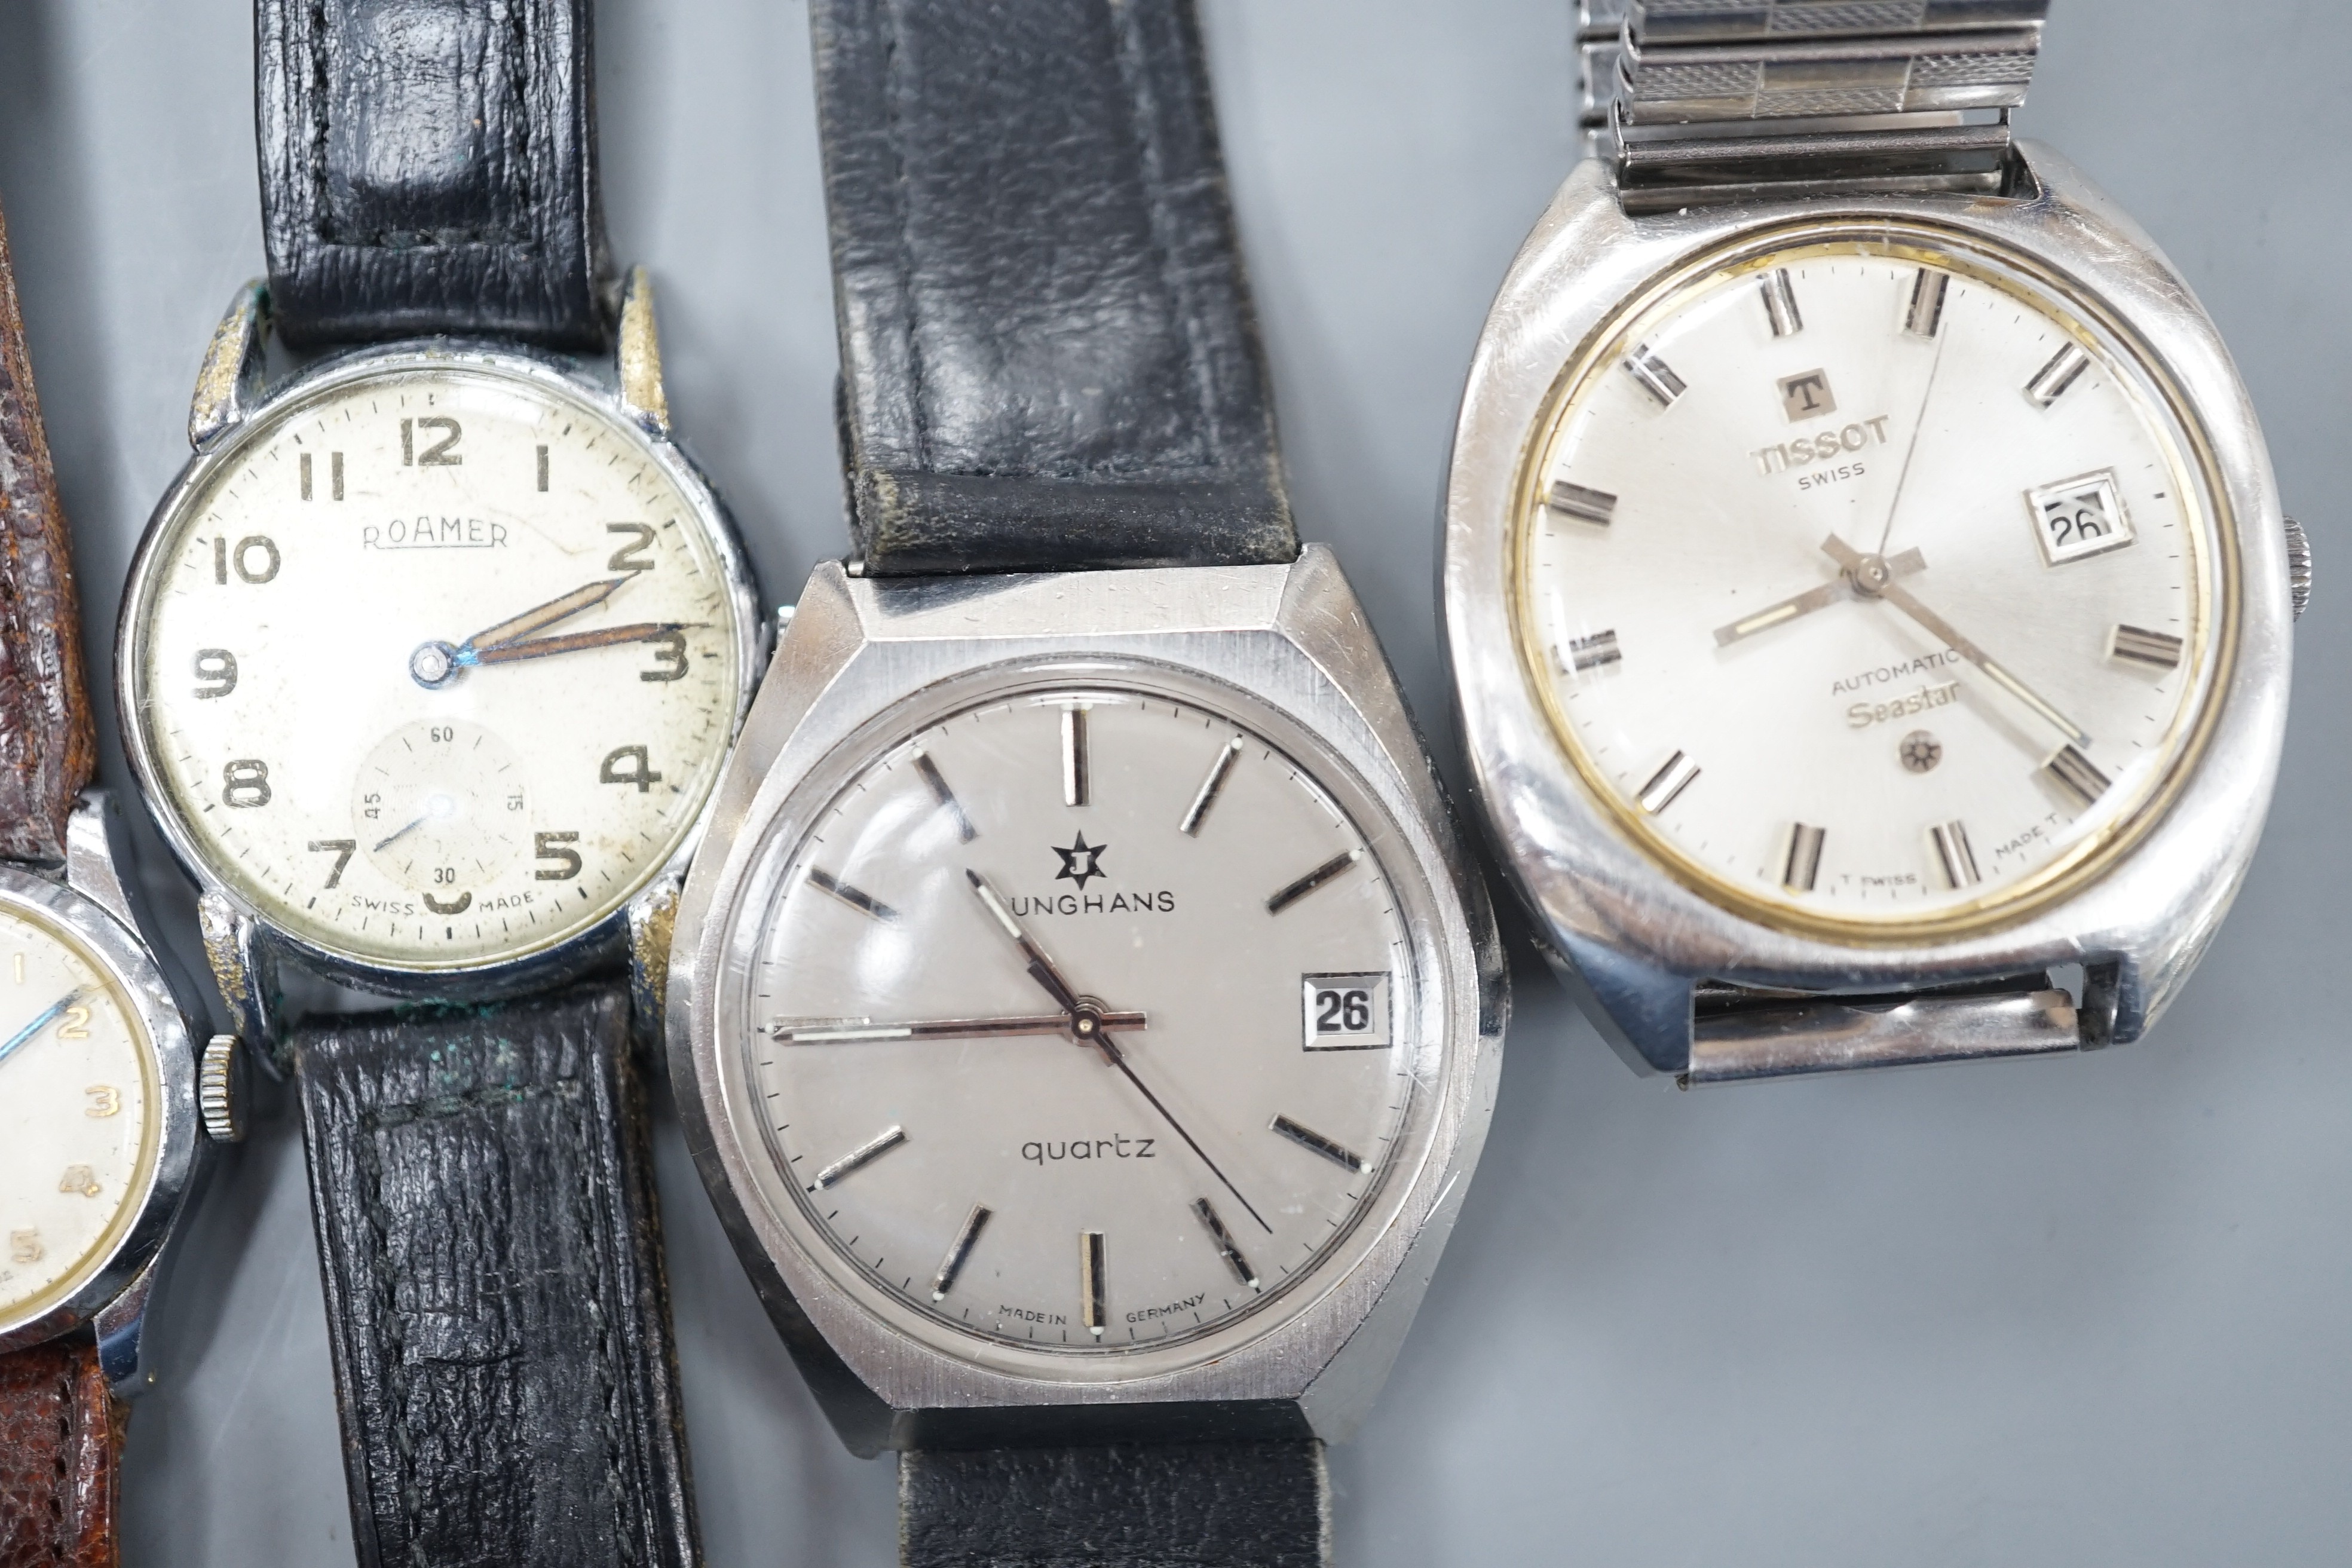 Three assorted gentleman's wrist watches including Junghans quartz, Roamer and Tissot and three lady's watches including Ingersoll and 9ct gold without strap.